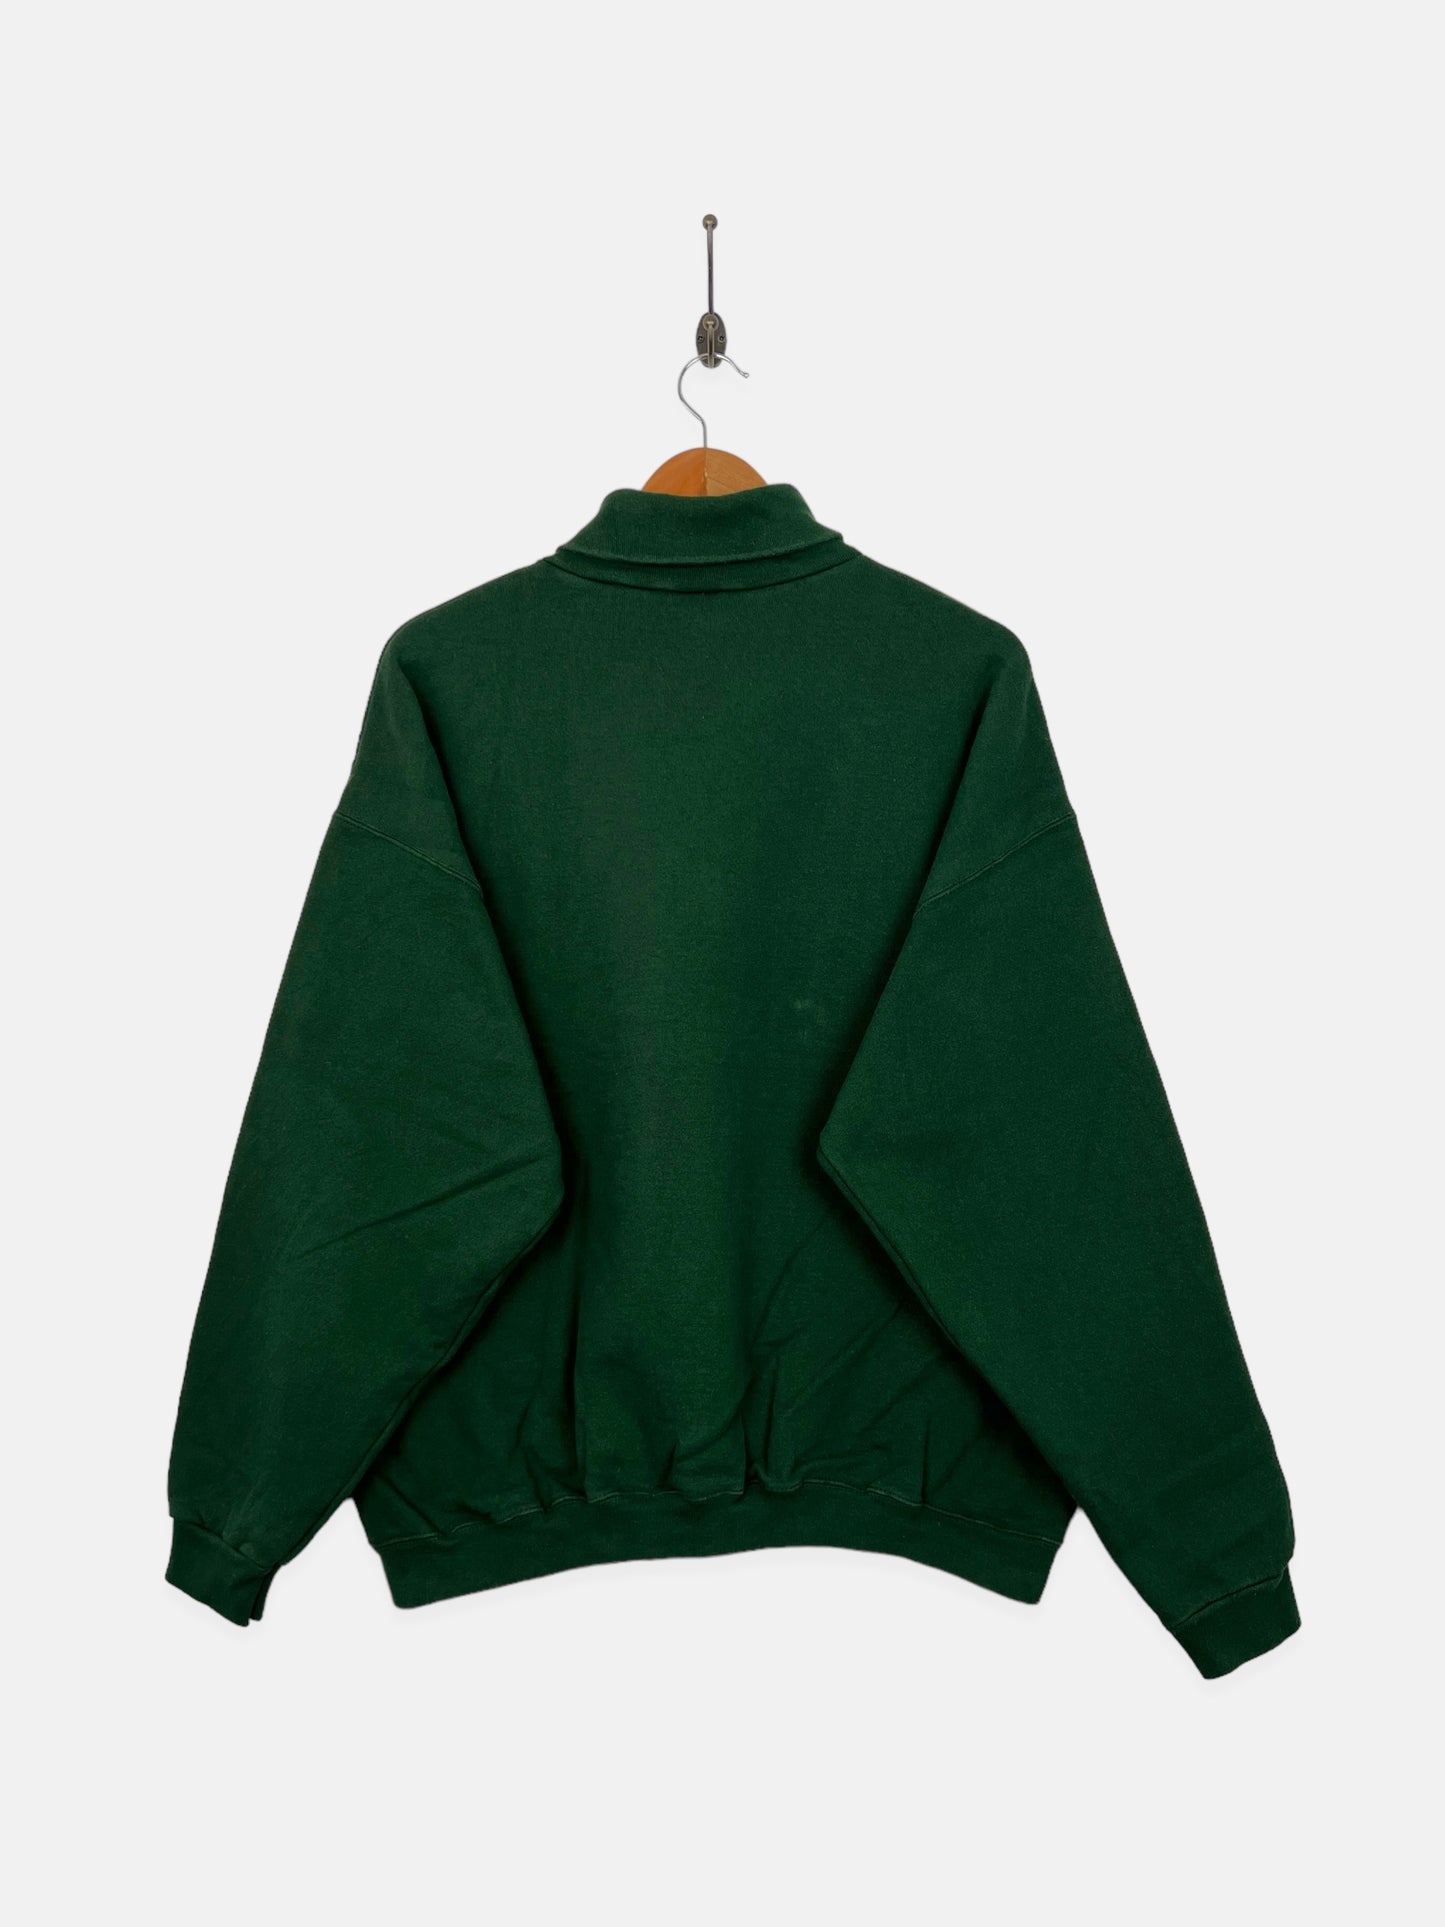 90's Green USA Made Embroidered Vintage Turtle-Neck Sweatshirt Size L